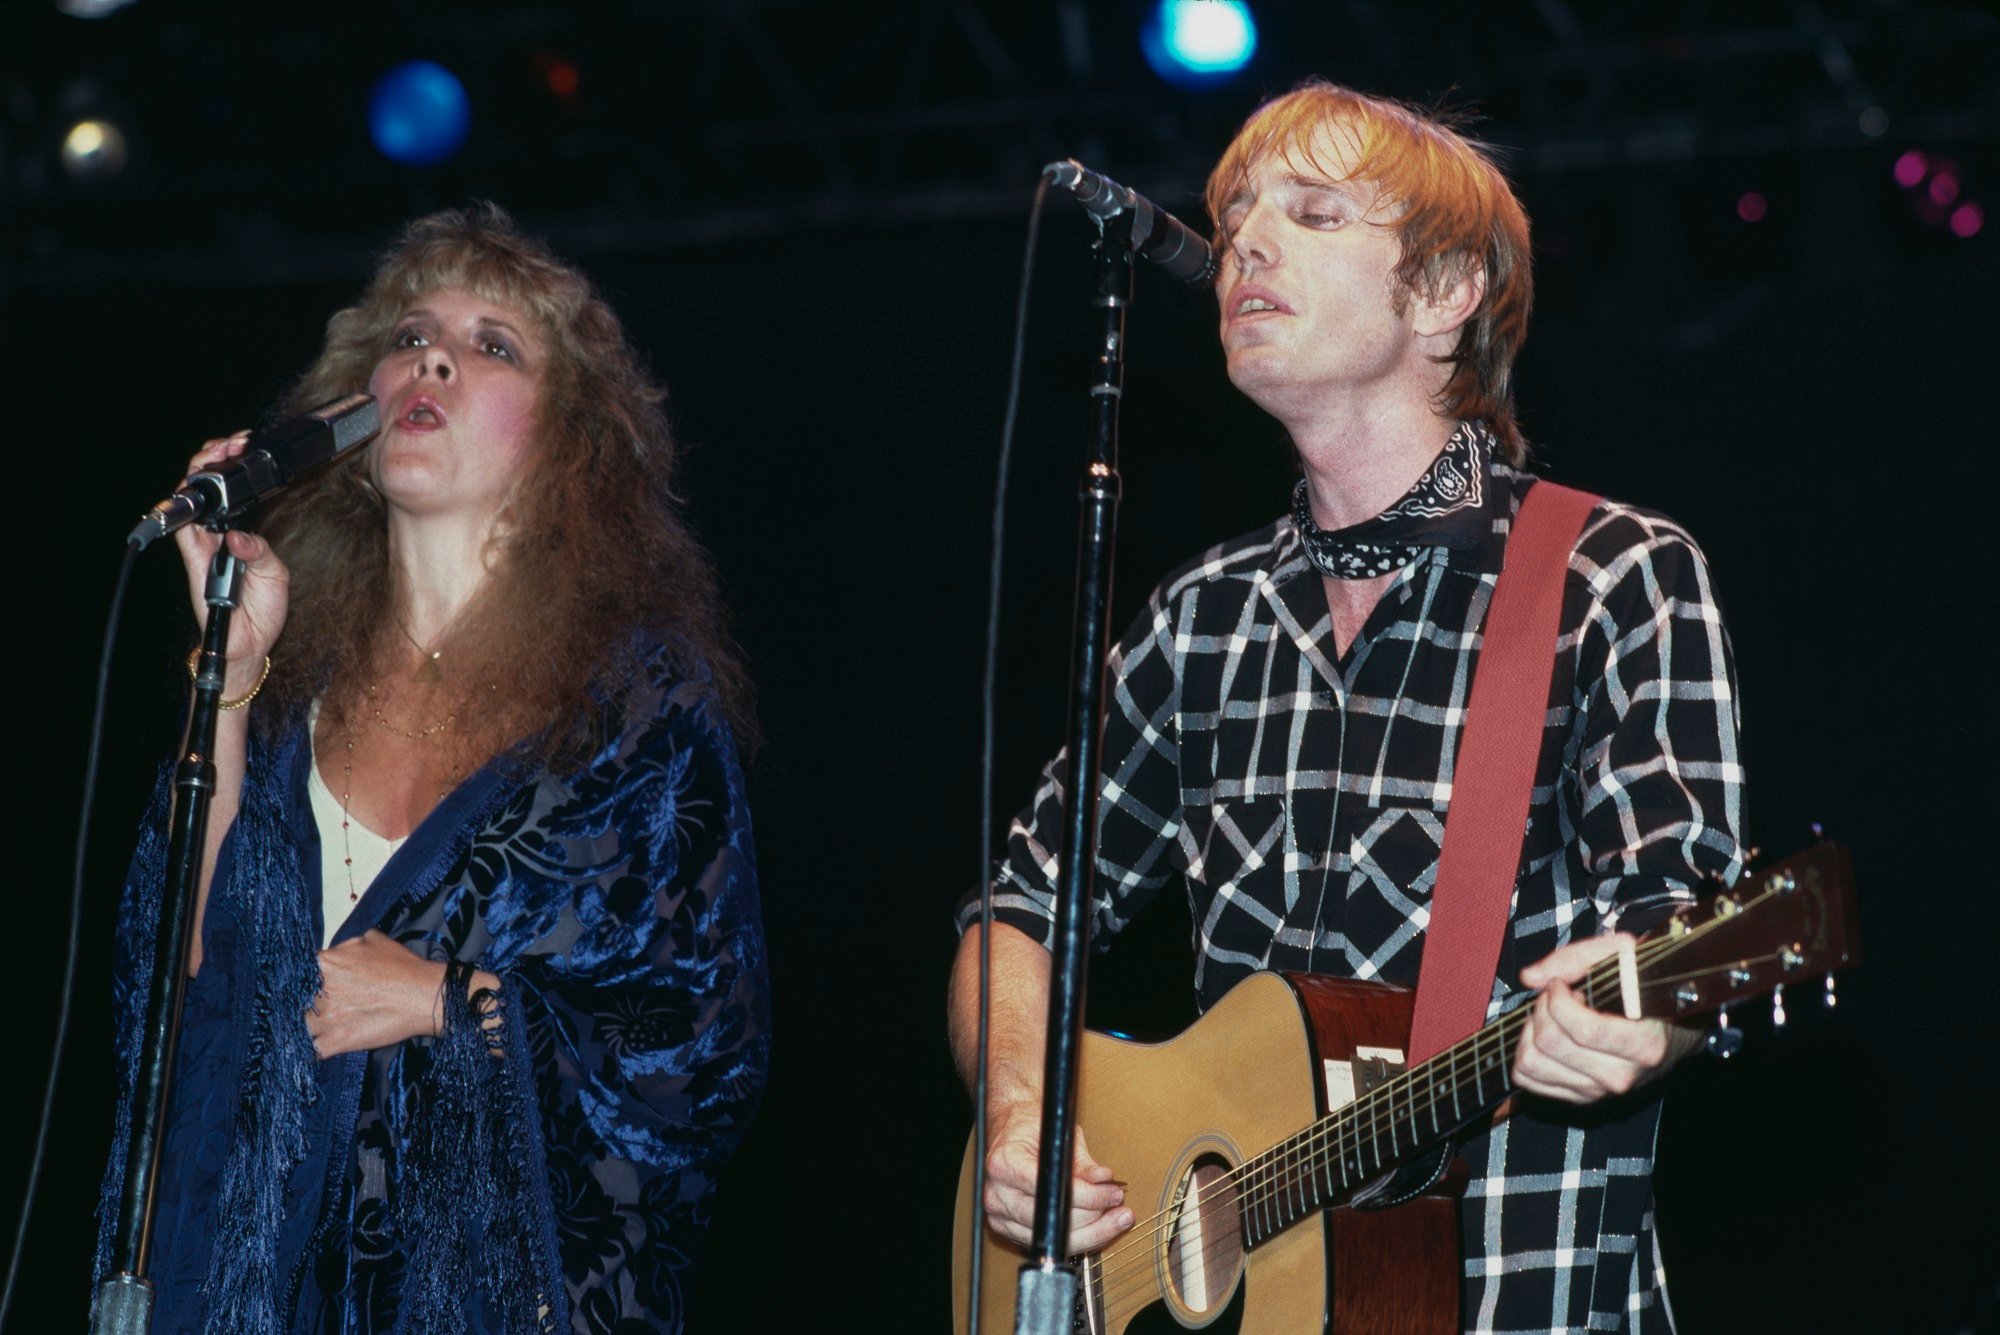 Stevie Nicks singing and Tom Petty playing the guitar onstage